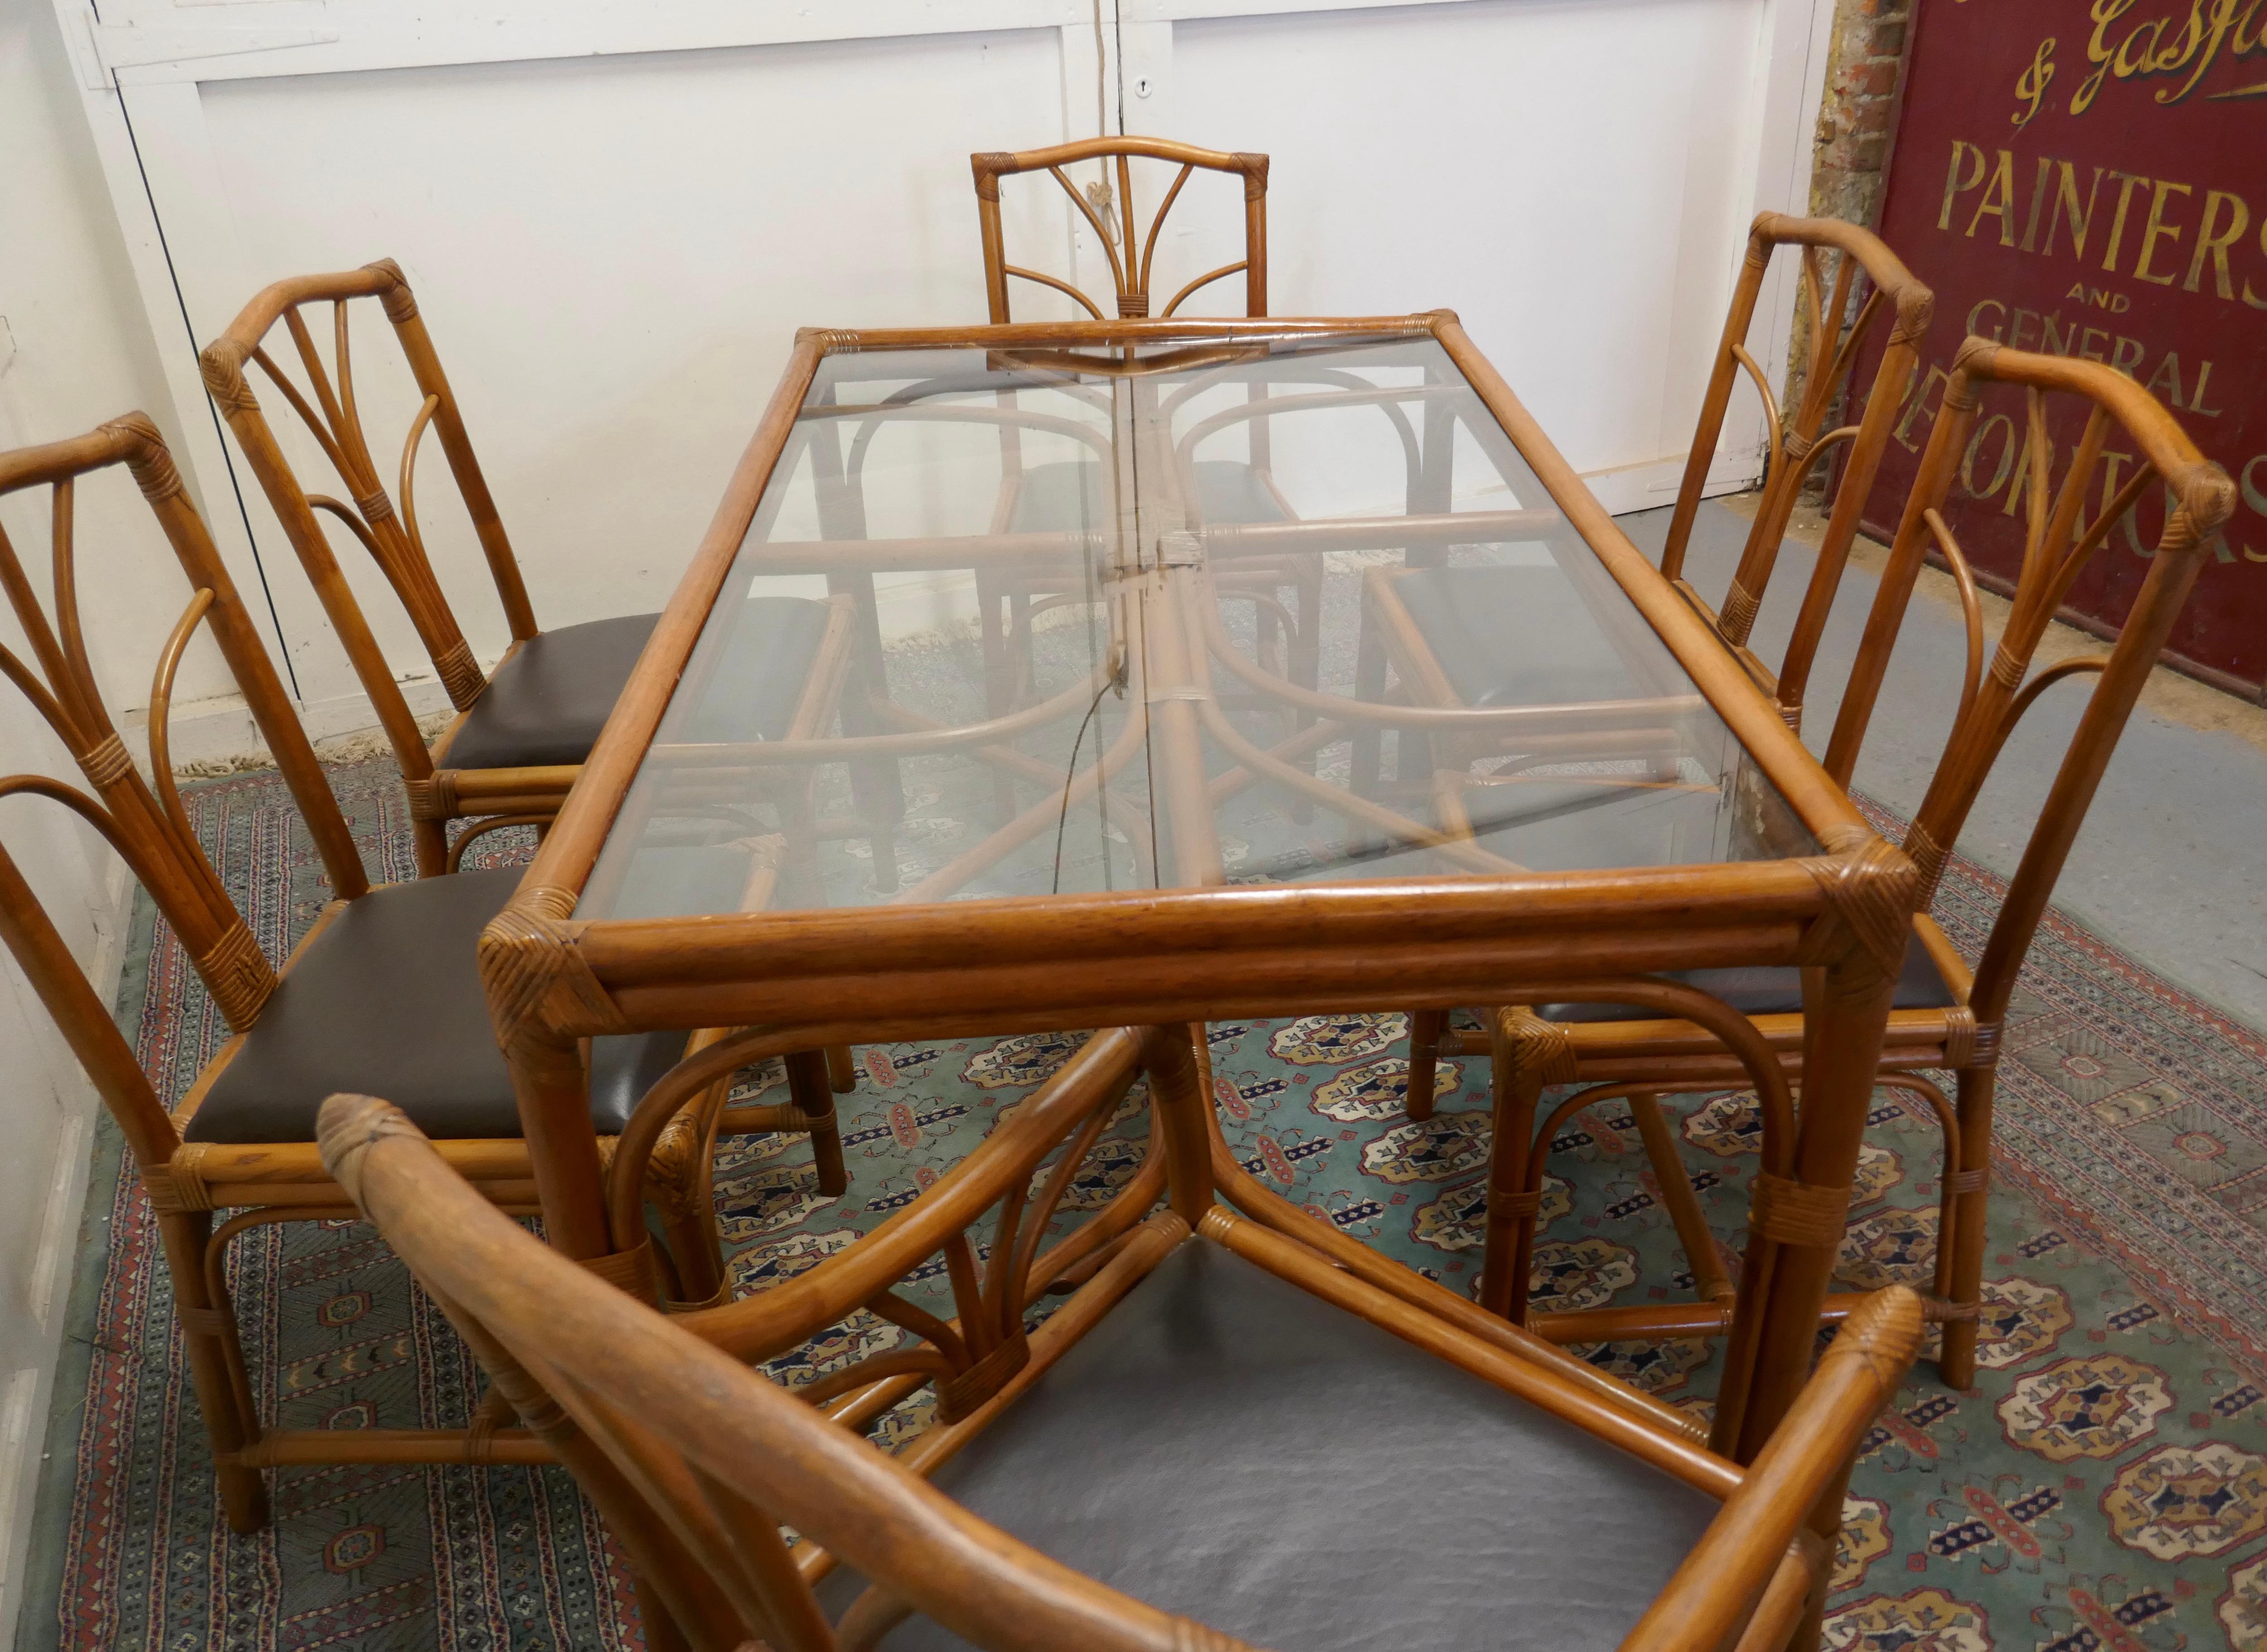 Regency Style Simulated Bamboo Dining Table and 6 Chairs

This superb and large set would be wonderful in a large Garden or Modern conservatory, the table has a removable glass top and the chairs have leather upholstered seats.

A wonderful set